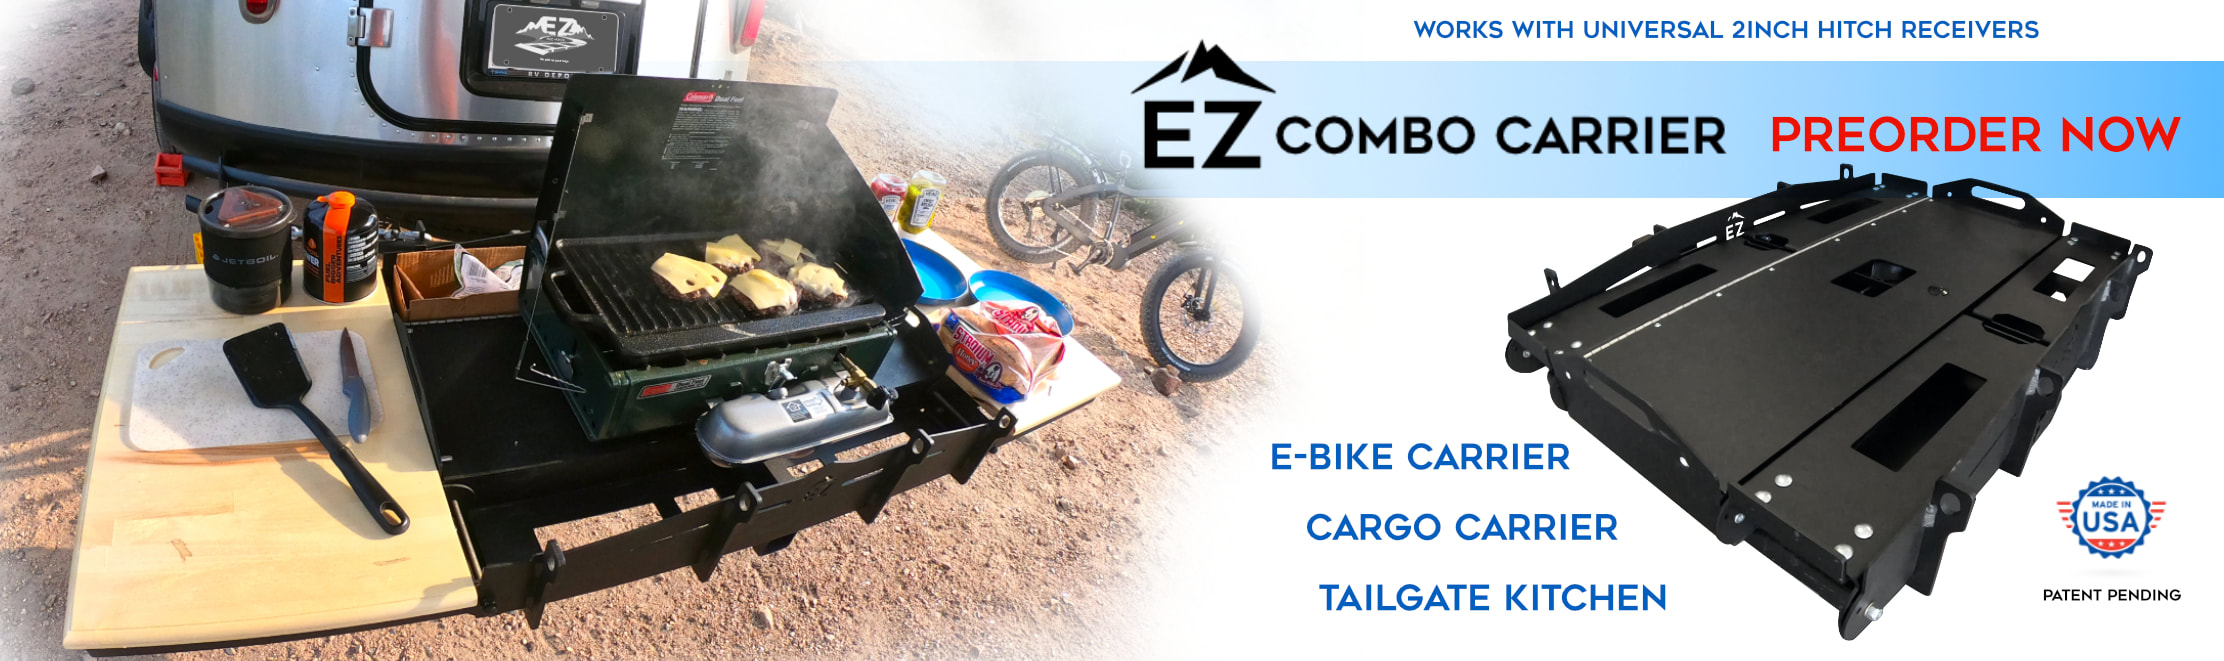 EZ Combo Carrier is the most versatile cargo carrier on the market.